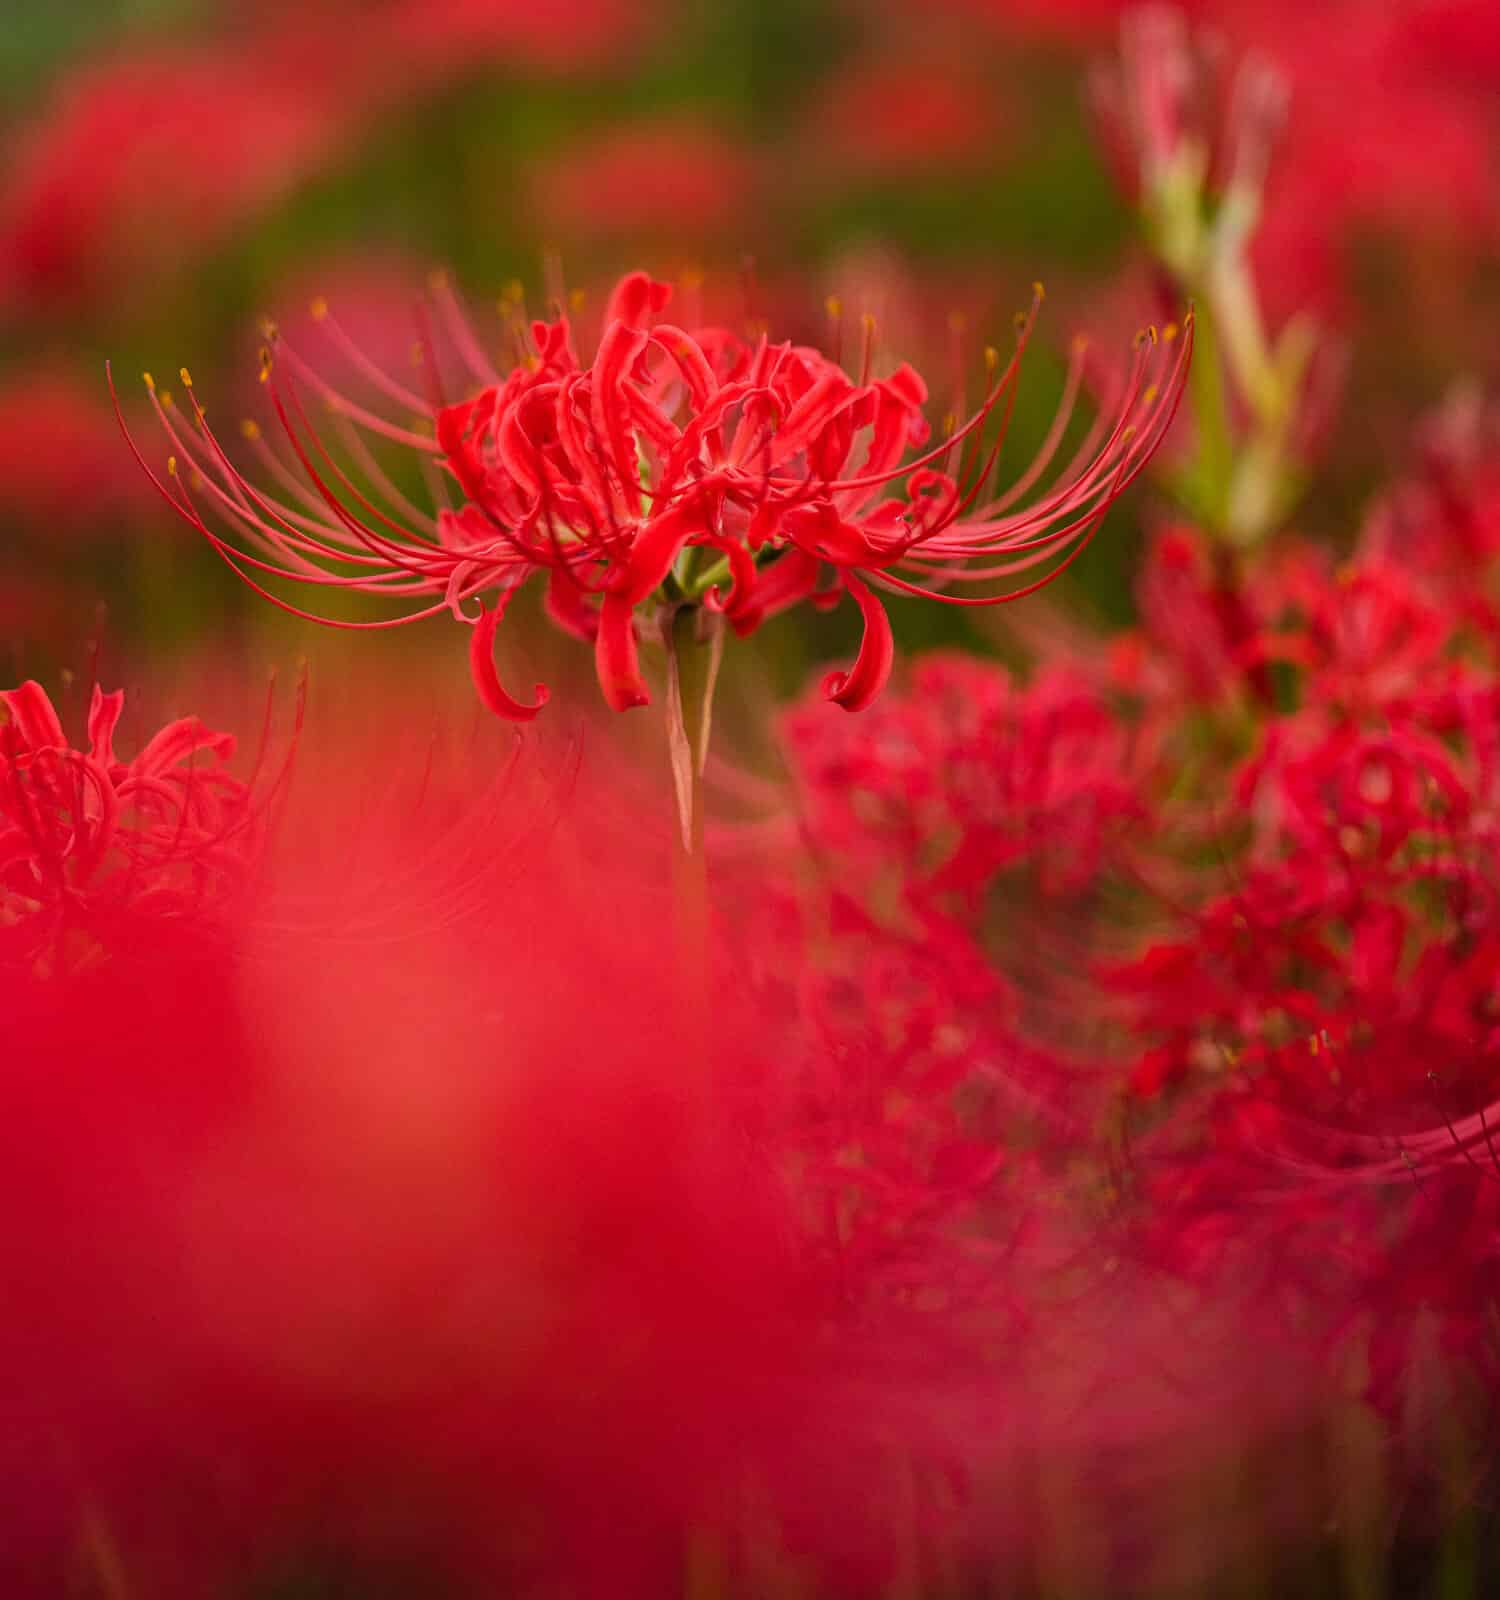 Red spider lily blooming in autumn